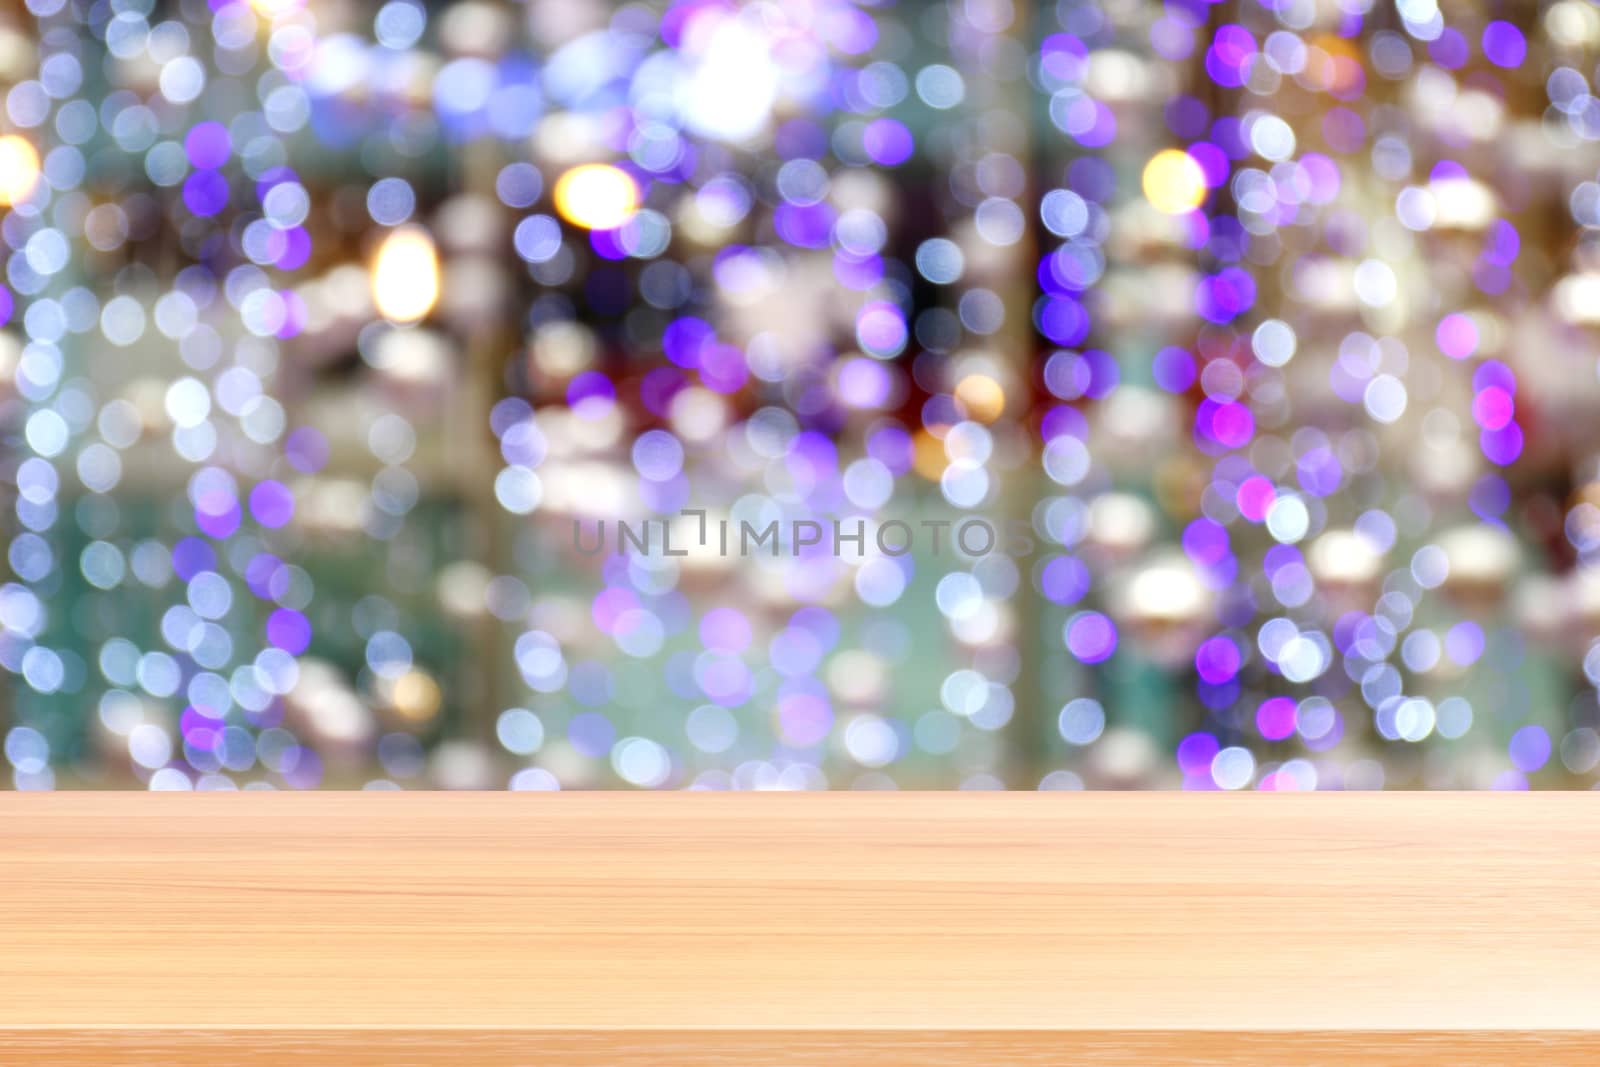 wood plank on bokeh purple lighting vivid colorful abstract background, empty wood table floors lighting decoration in shopping mall, wood table board empty front violet bokeh glitter interior light by cgdeaw